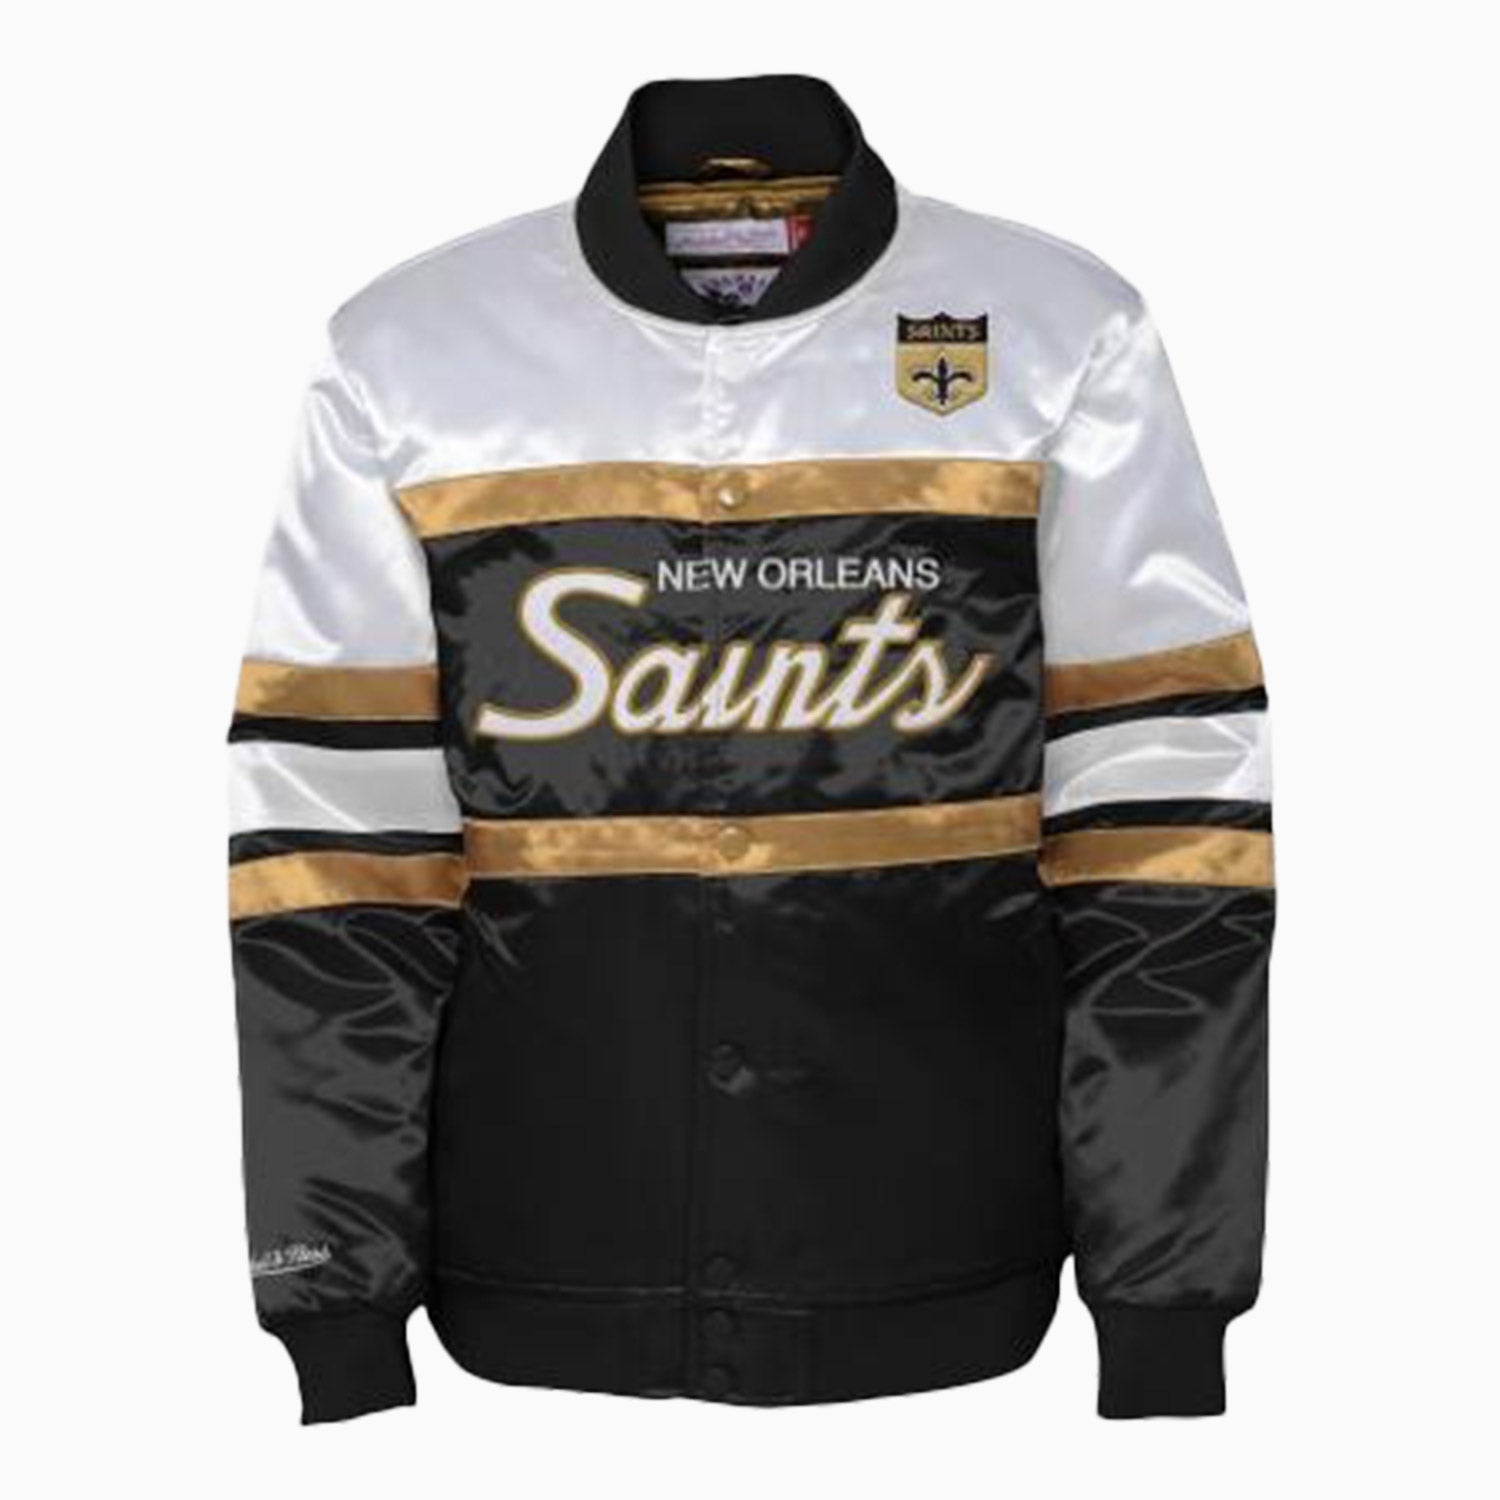 Mitchell & Ness New Orleans Saints NFL Satin Jacket Youth - Color: Black White Gold - Kids Premium Clothing -